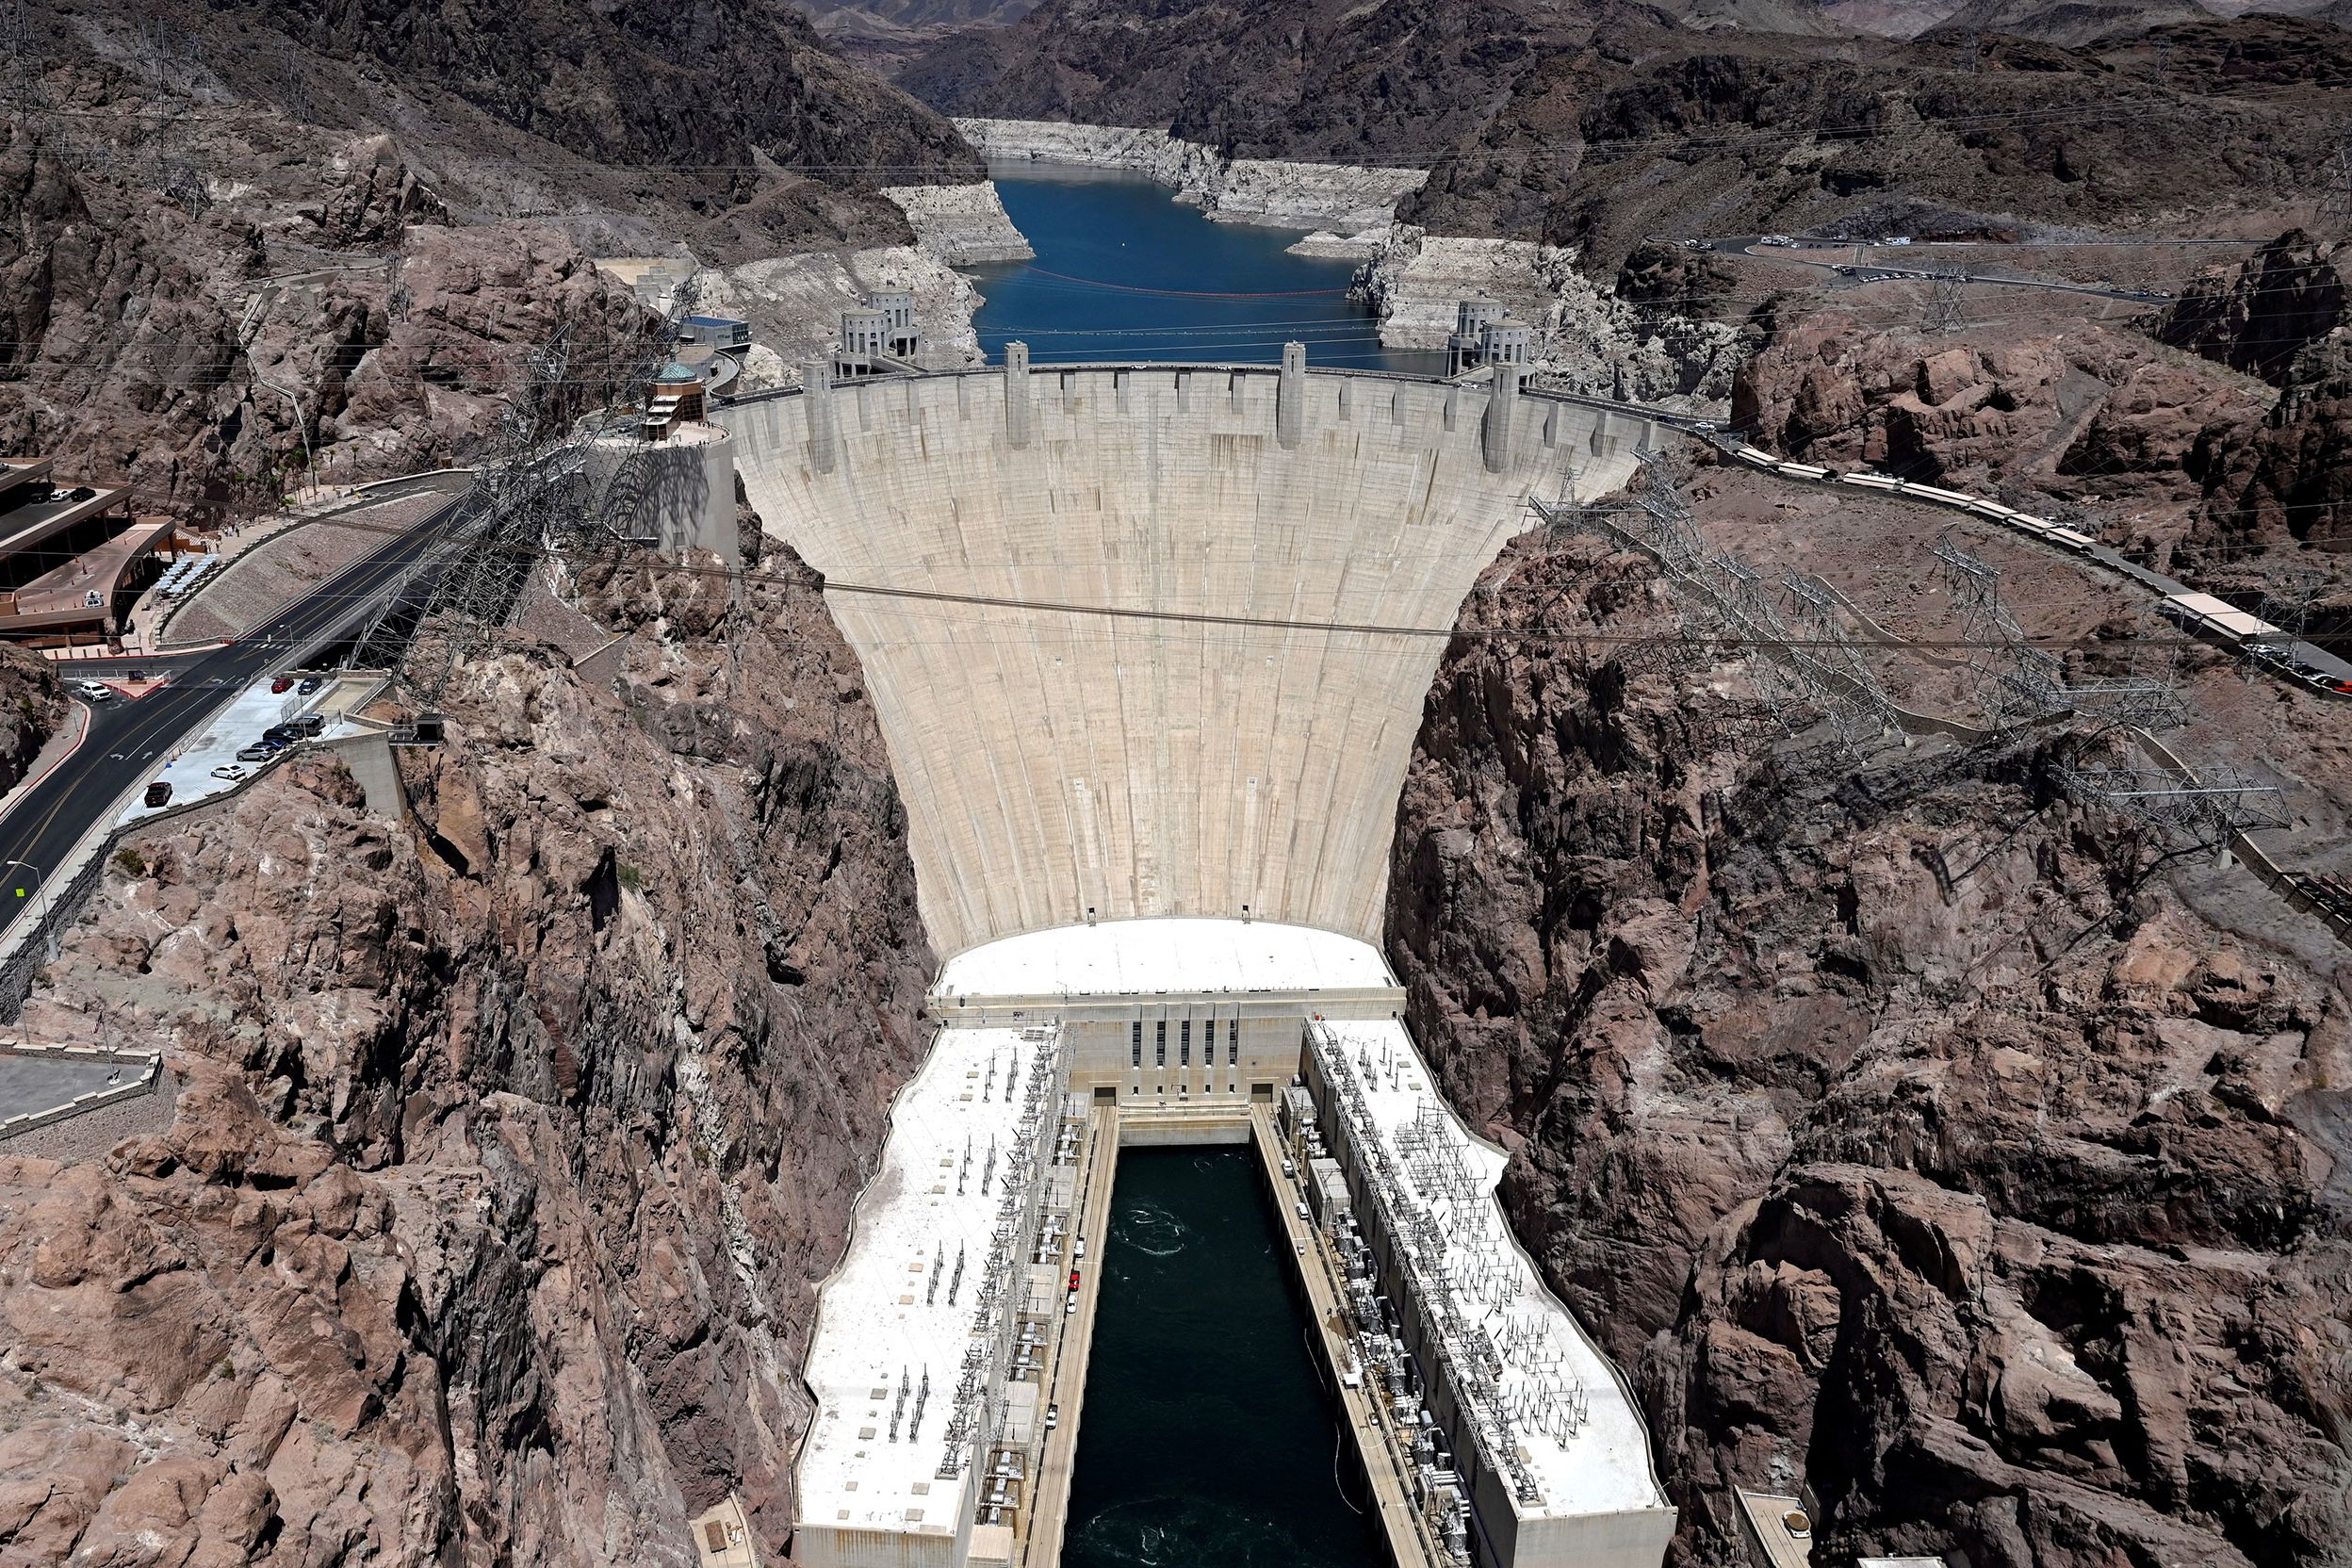 Hoover Dam hydropower is threatened by historic drought | CNN